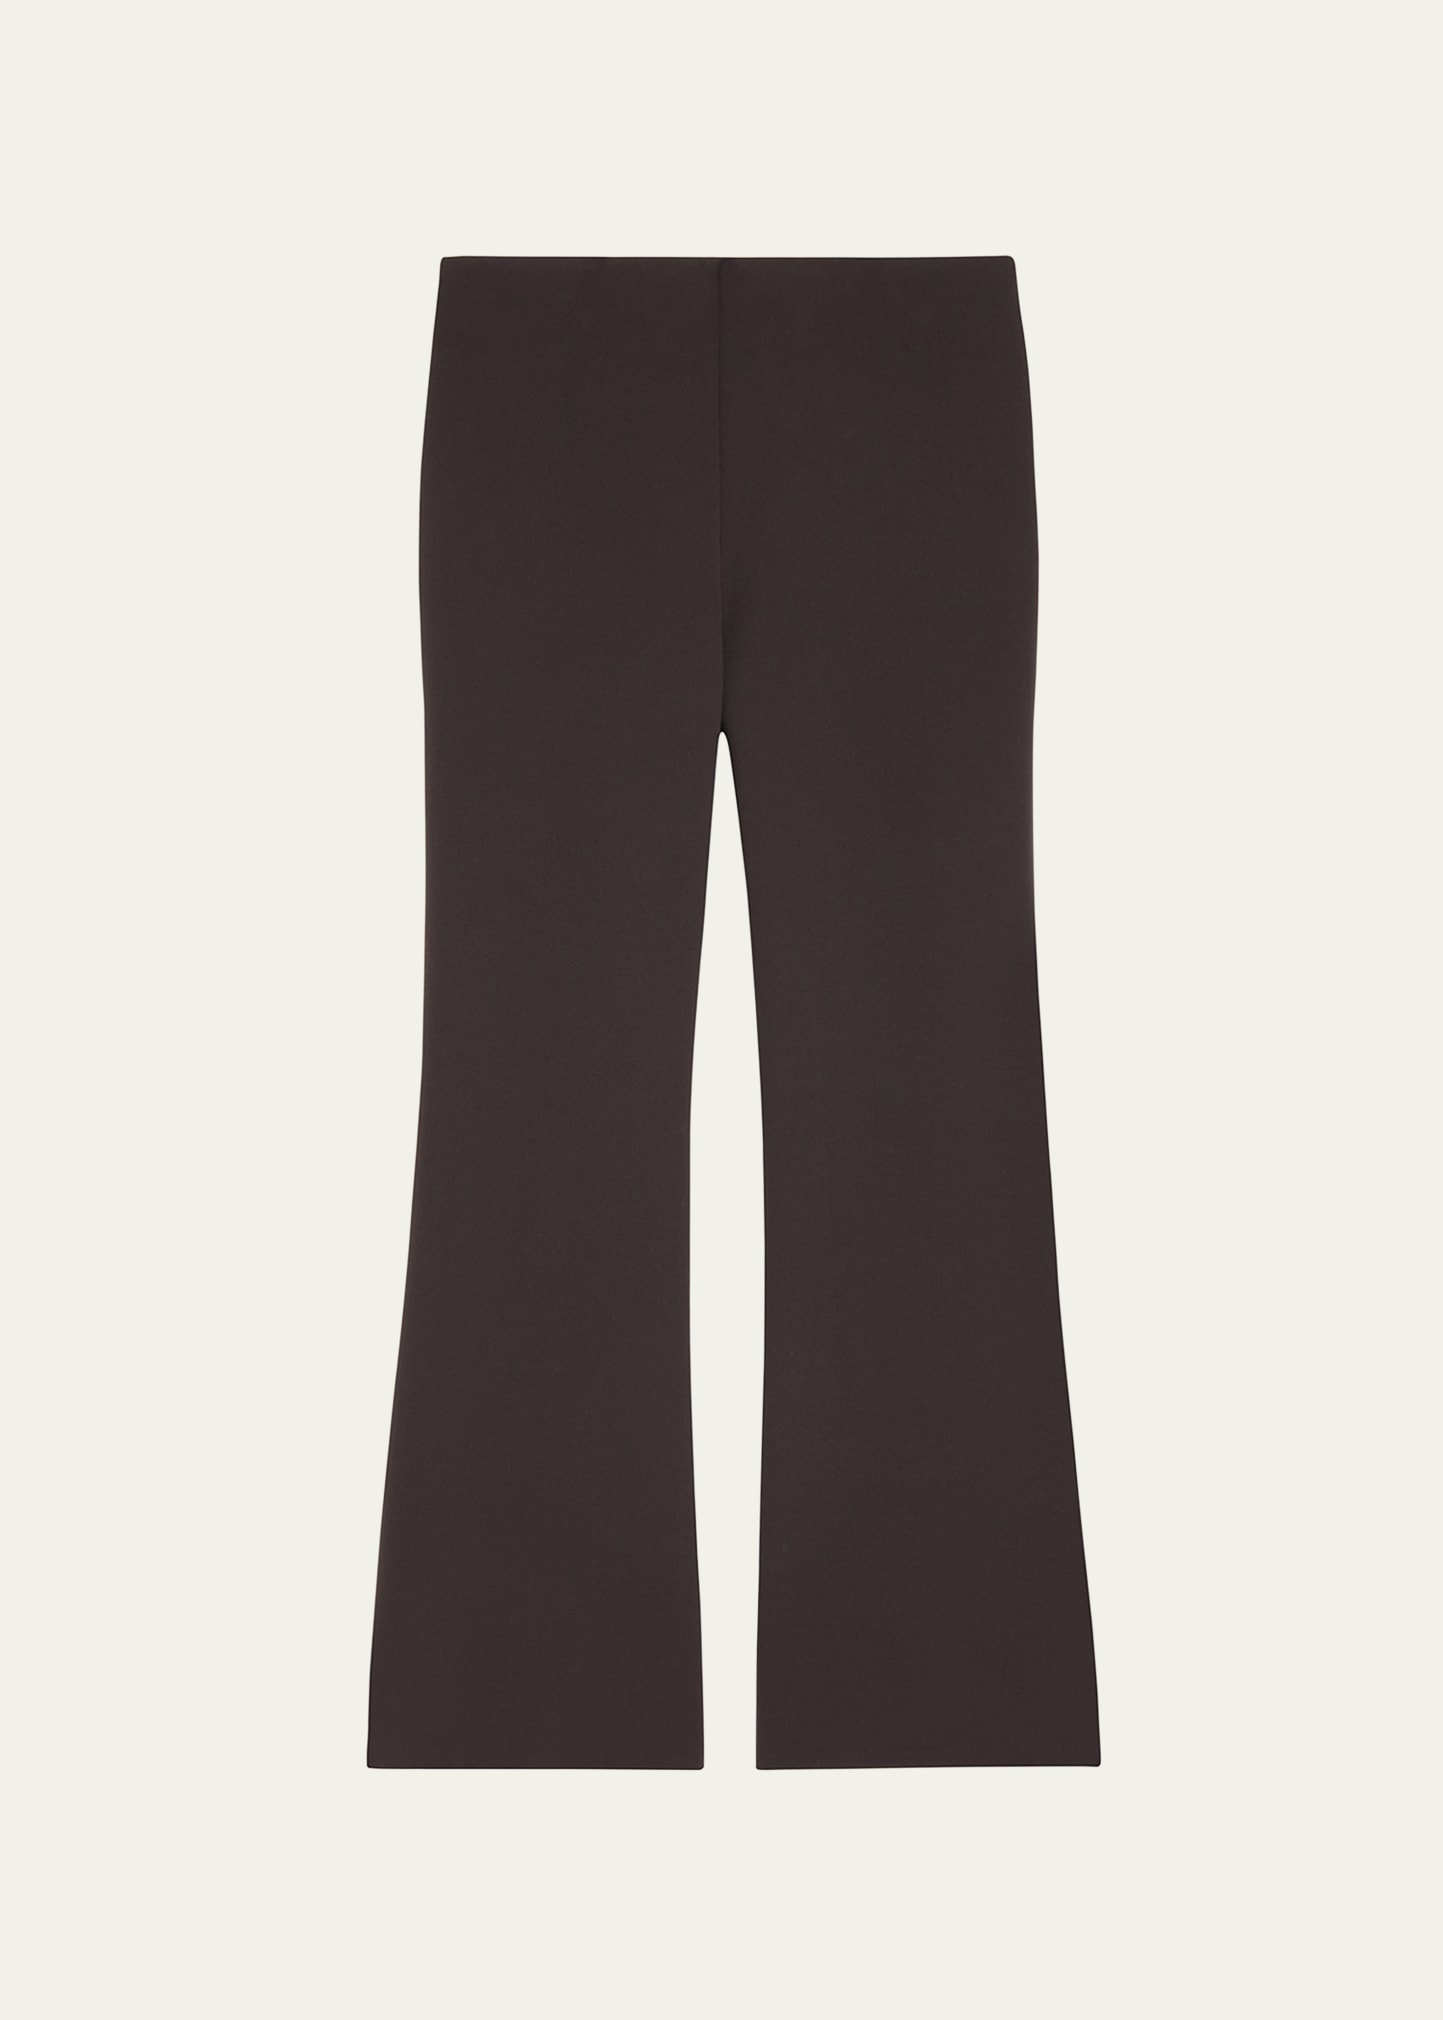 Demitria Good Wool Suiting Trousers In Nctrn Way